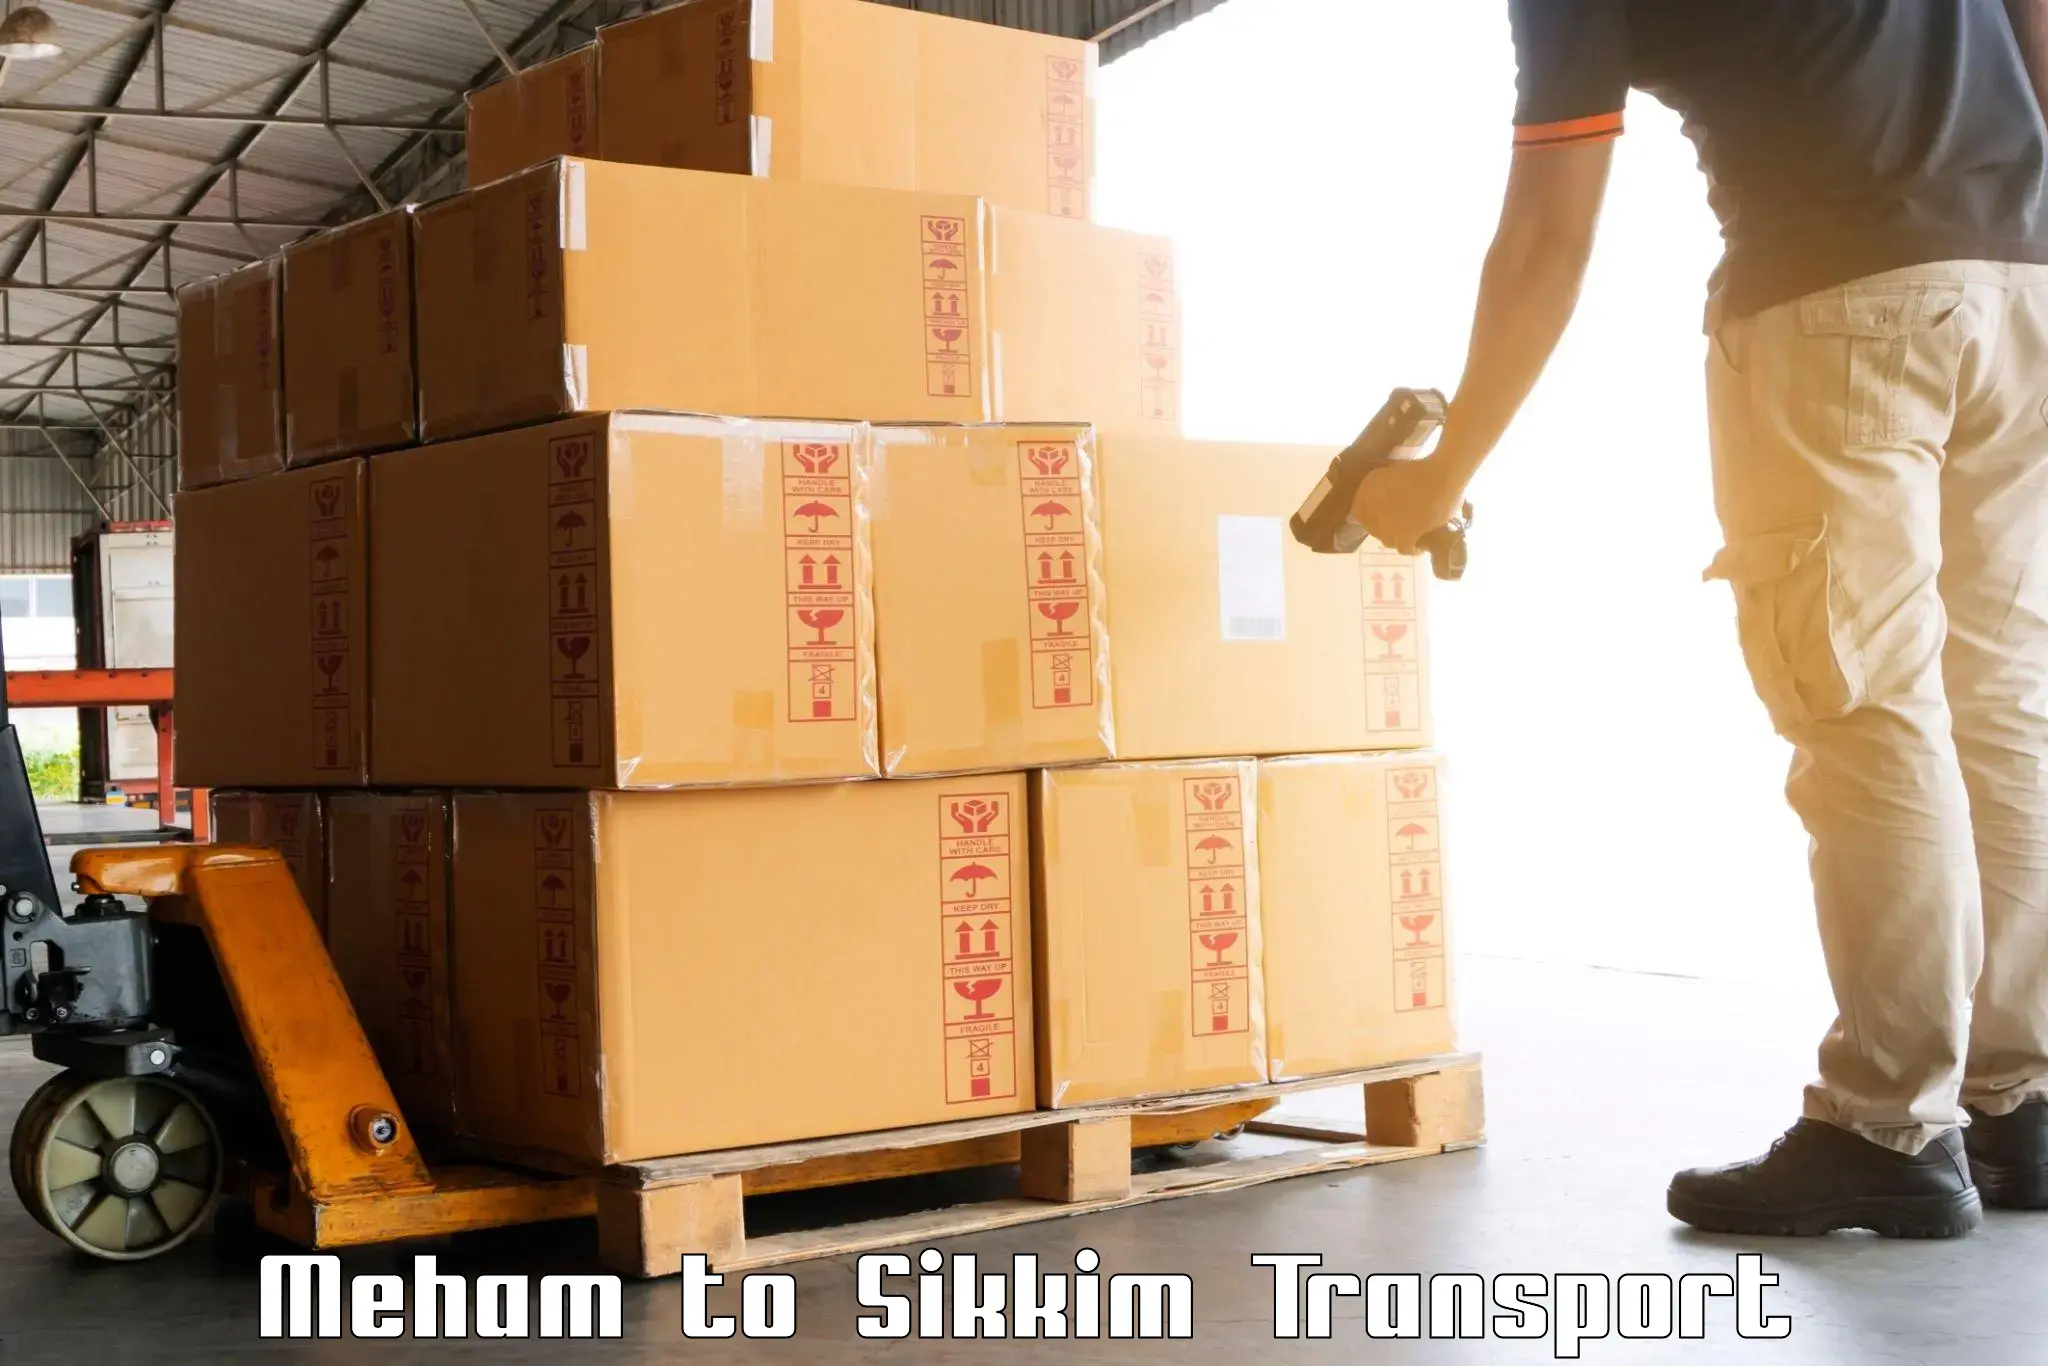 Daily transport service Meham to Sikkim